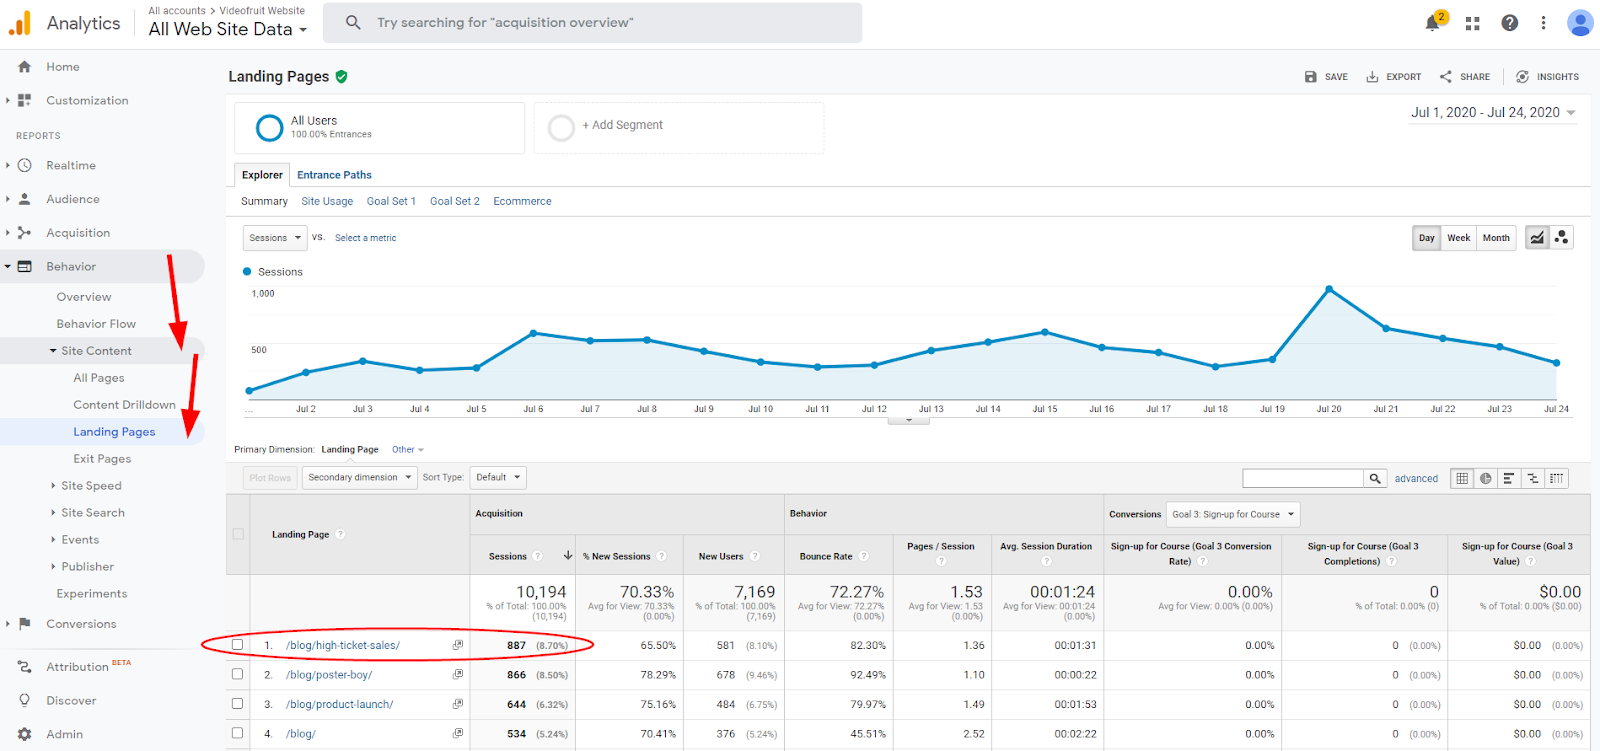 Use Google Analytics data to determine what content is doing the best.